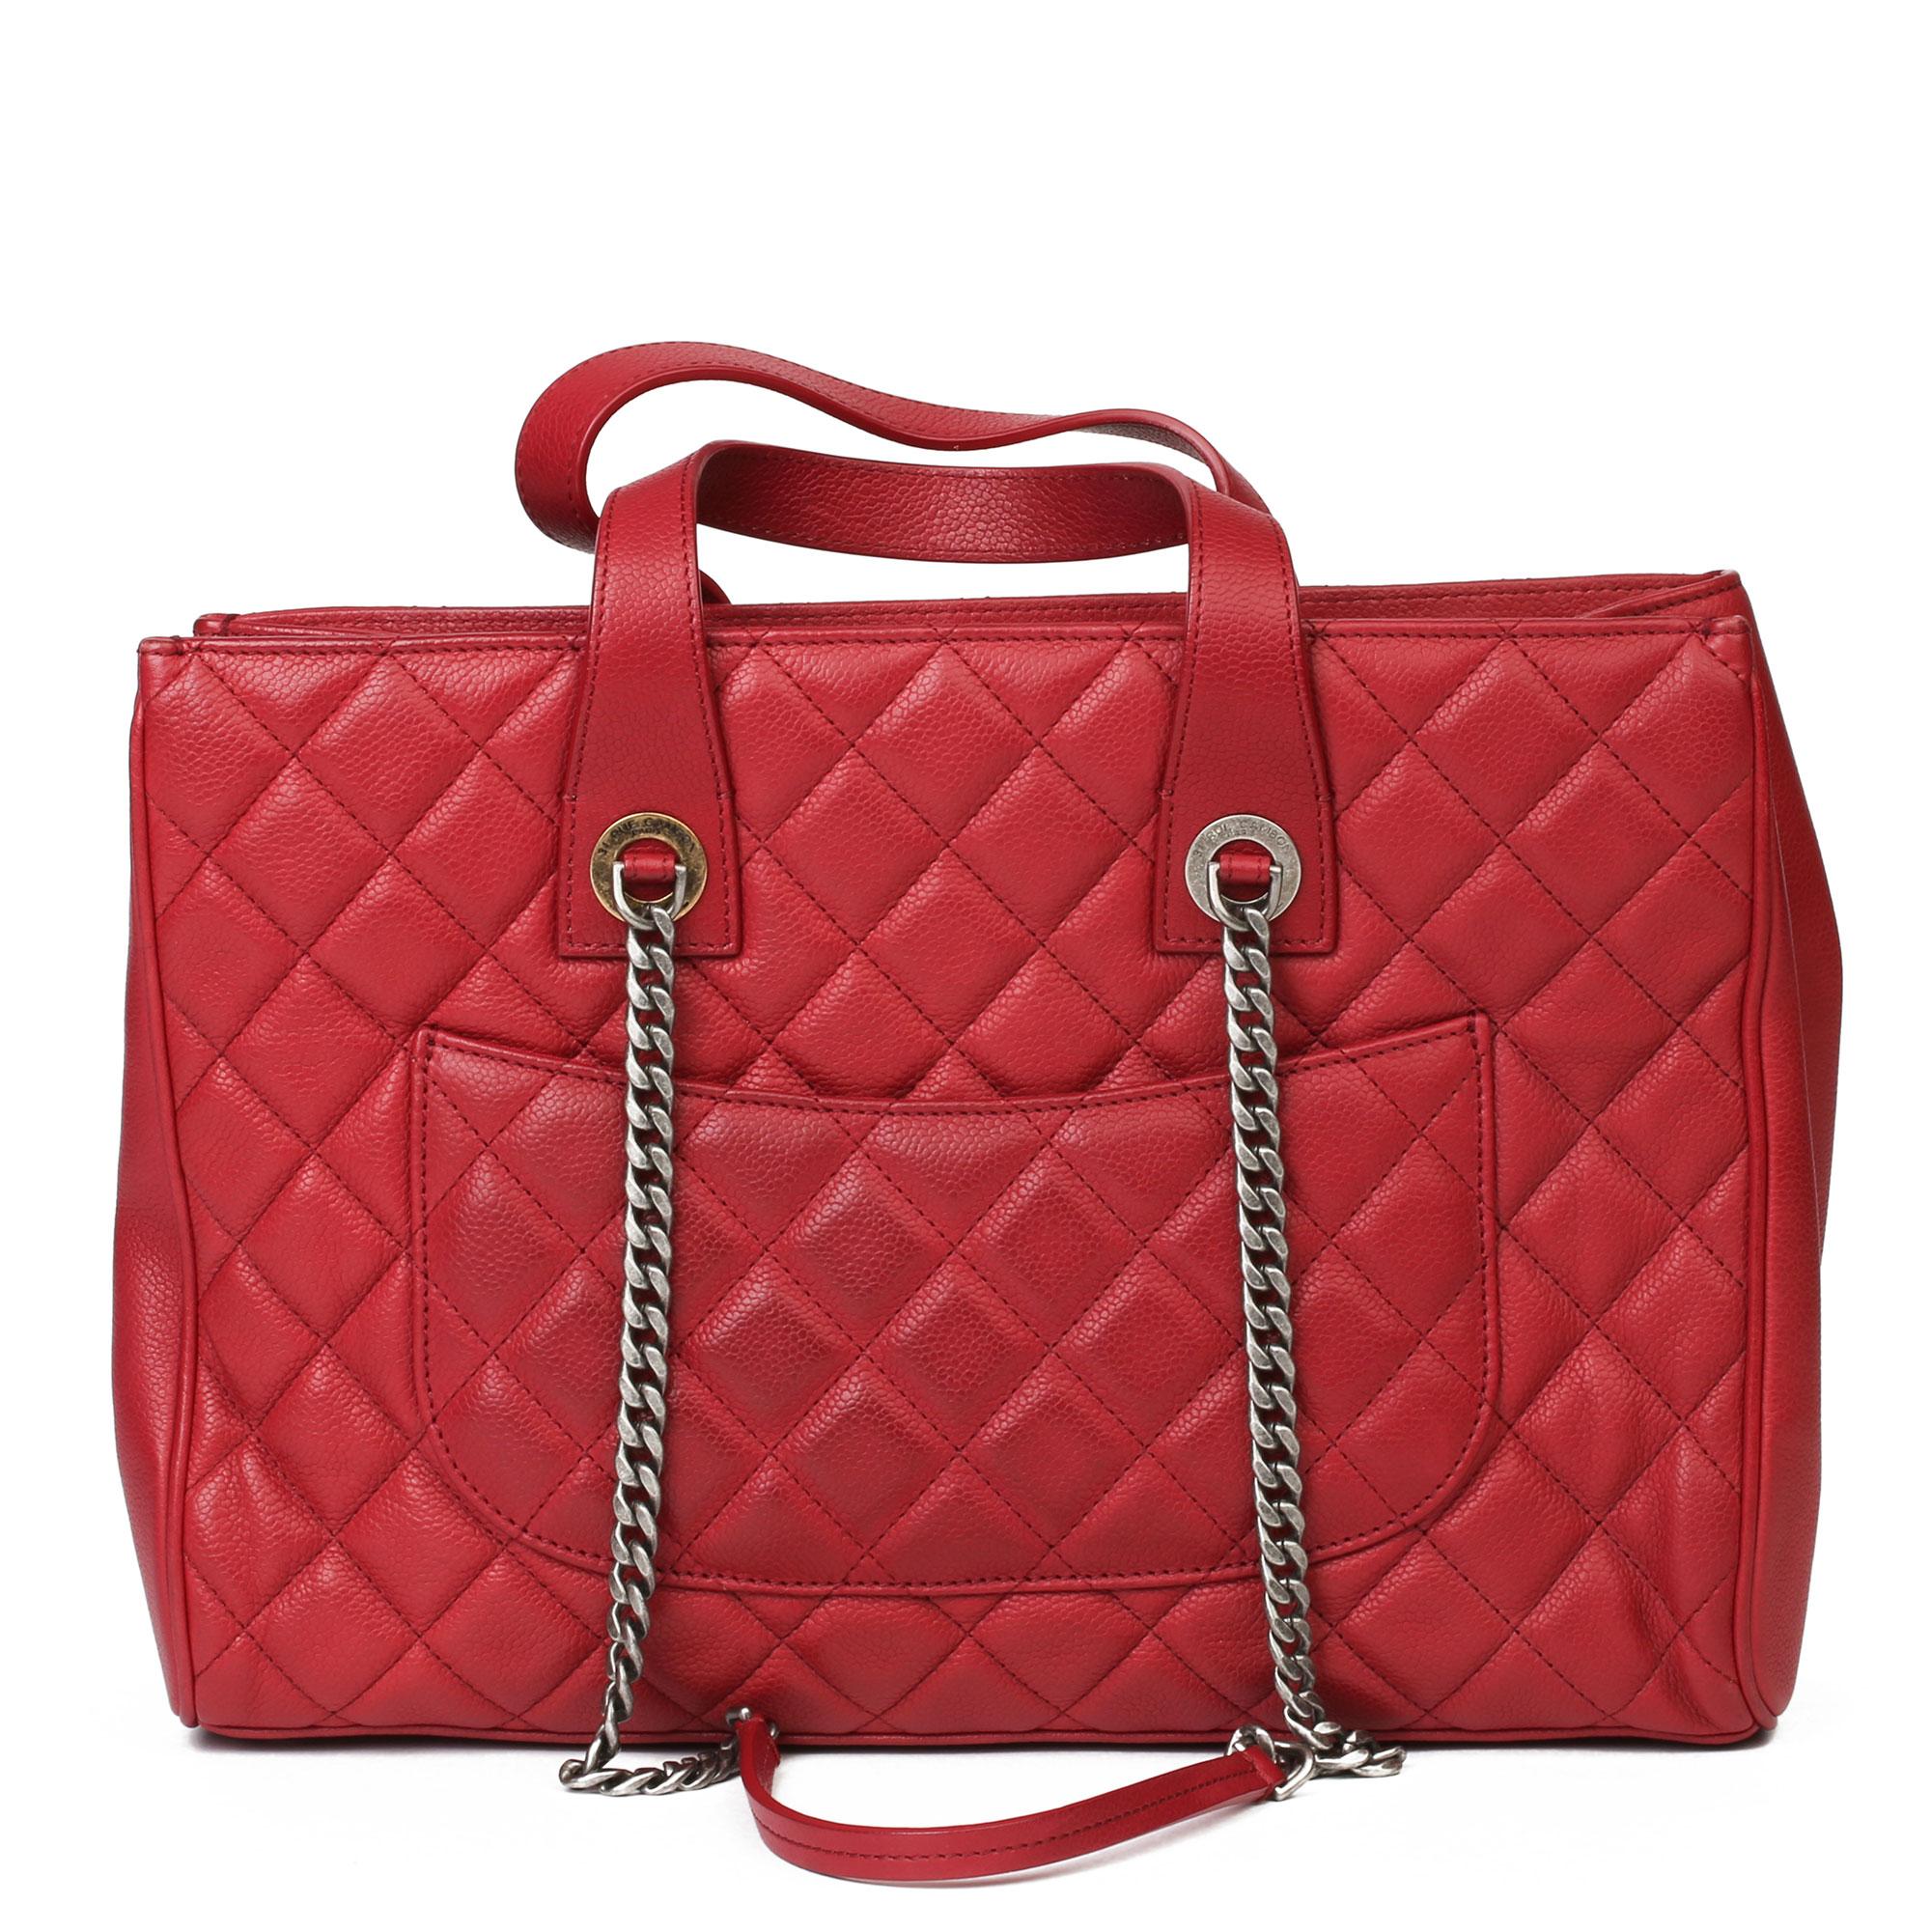 Red 2017 Chanel Burgundy Quilted Caviar Leather Timeless Shoulder Tote 